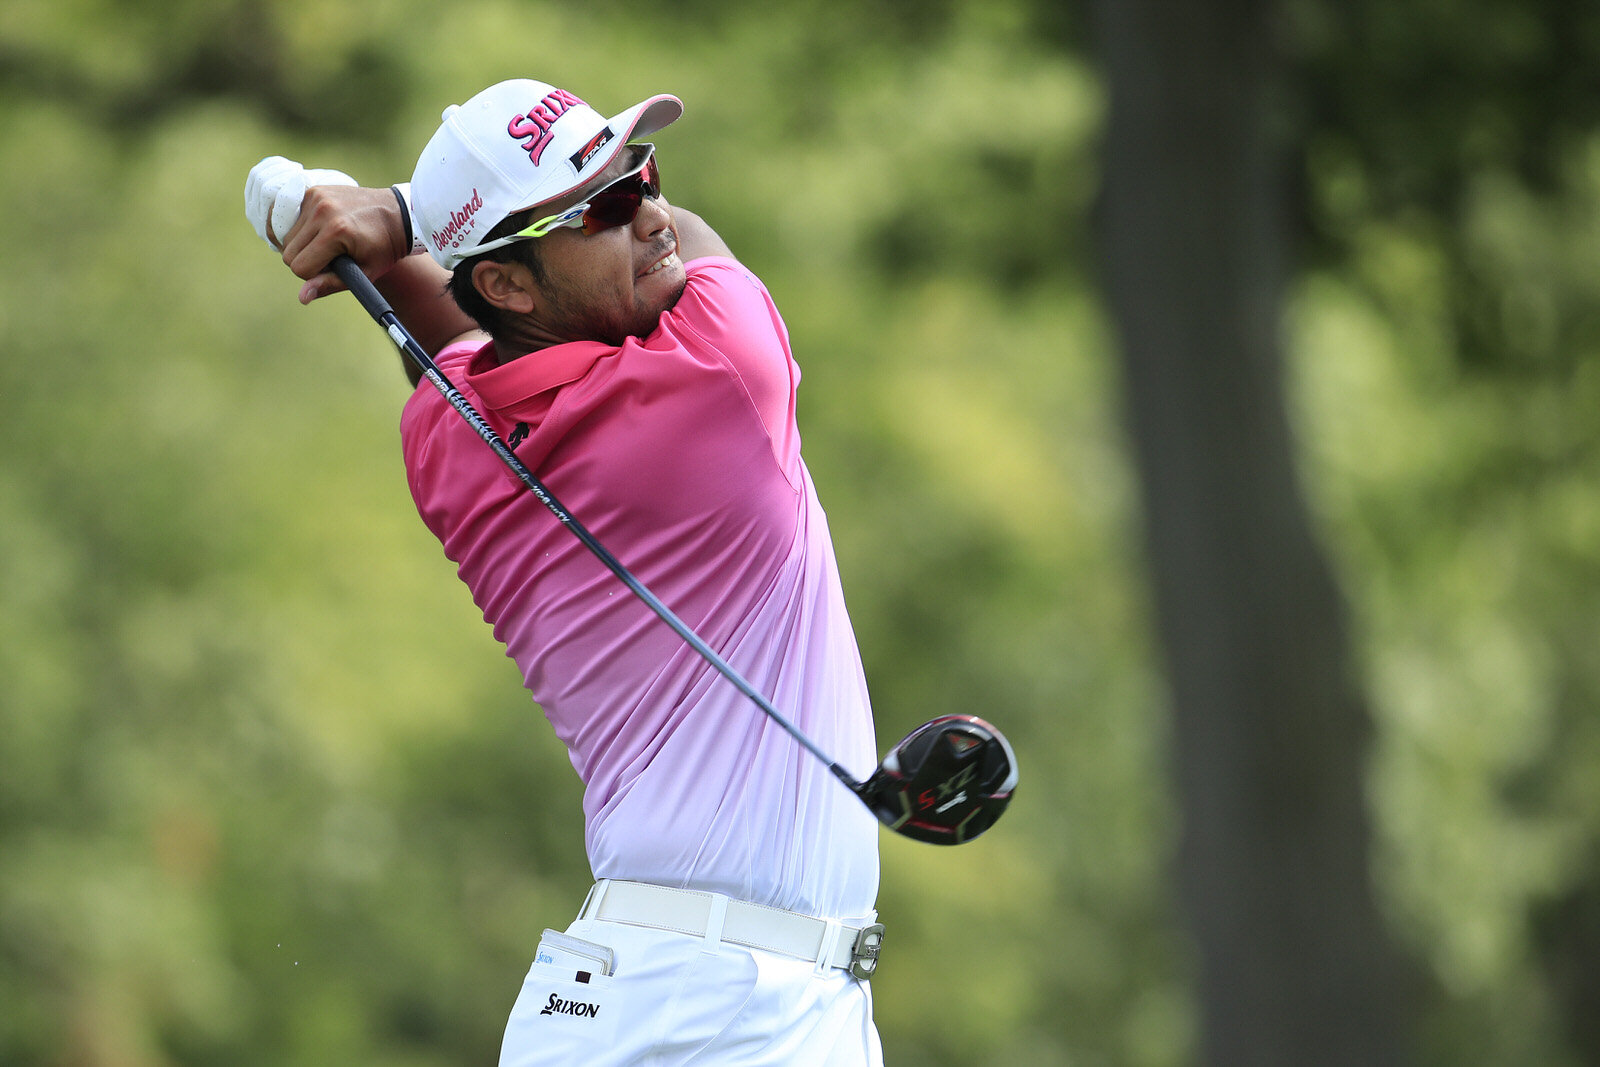  OLYMPIA FIELDS, ILLINOIS - AUGUST 28: Hideki Matsuyama of Japan plays his shot from the seventh tee during the second round of the BMW Championship on the North Course at Olympia Fields Country Club on August 28, 2020 in Olympia Fields, Illinois. (P